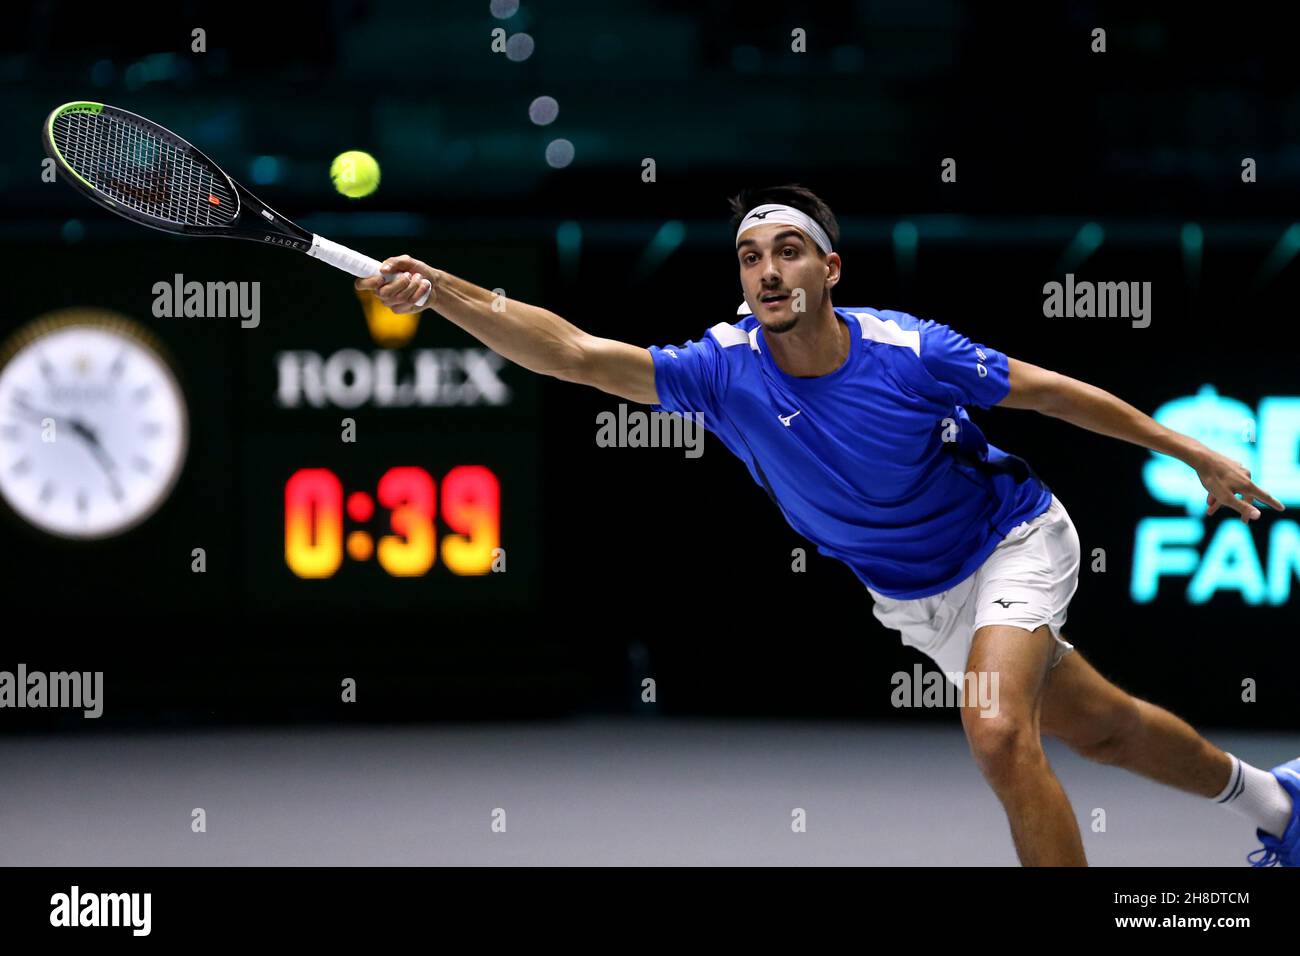 Lorenzo Sonego of Italy in action in the match against Borna Gojo of Croatia during the Davis Cup quarter-final match between Italy and Croatia at Pala Alpitour on November 29, 2021 in